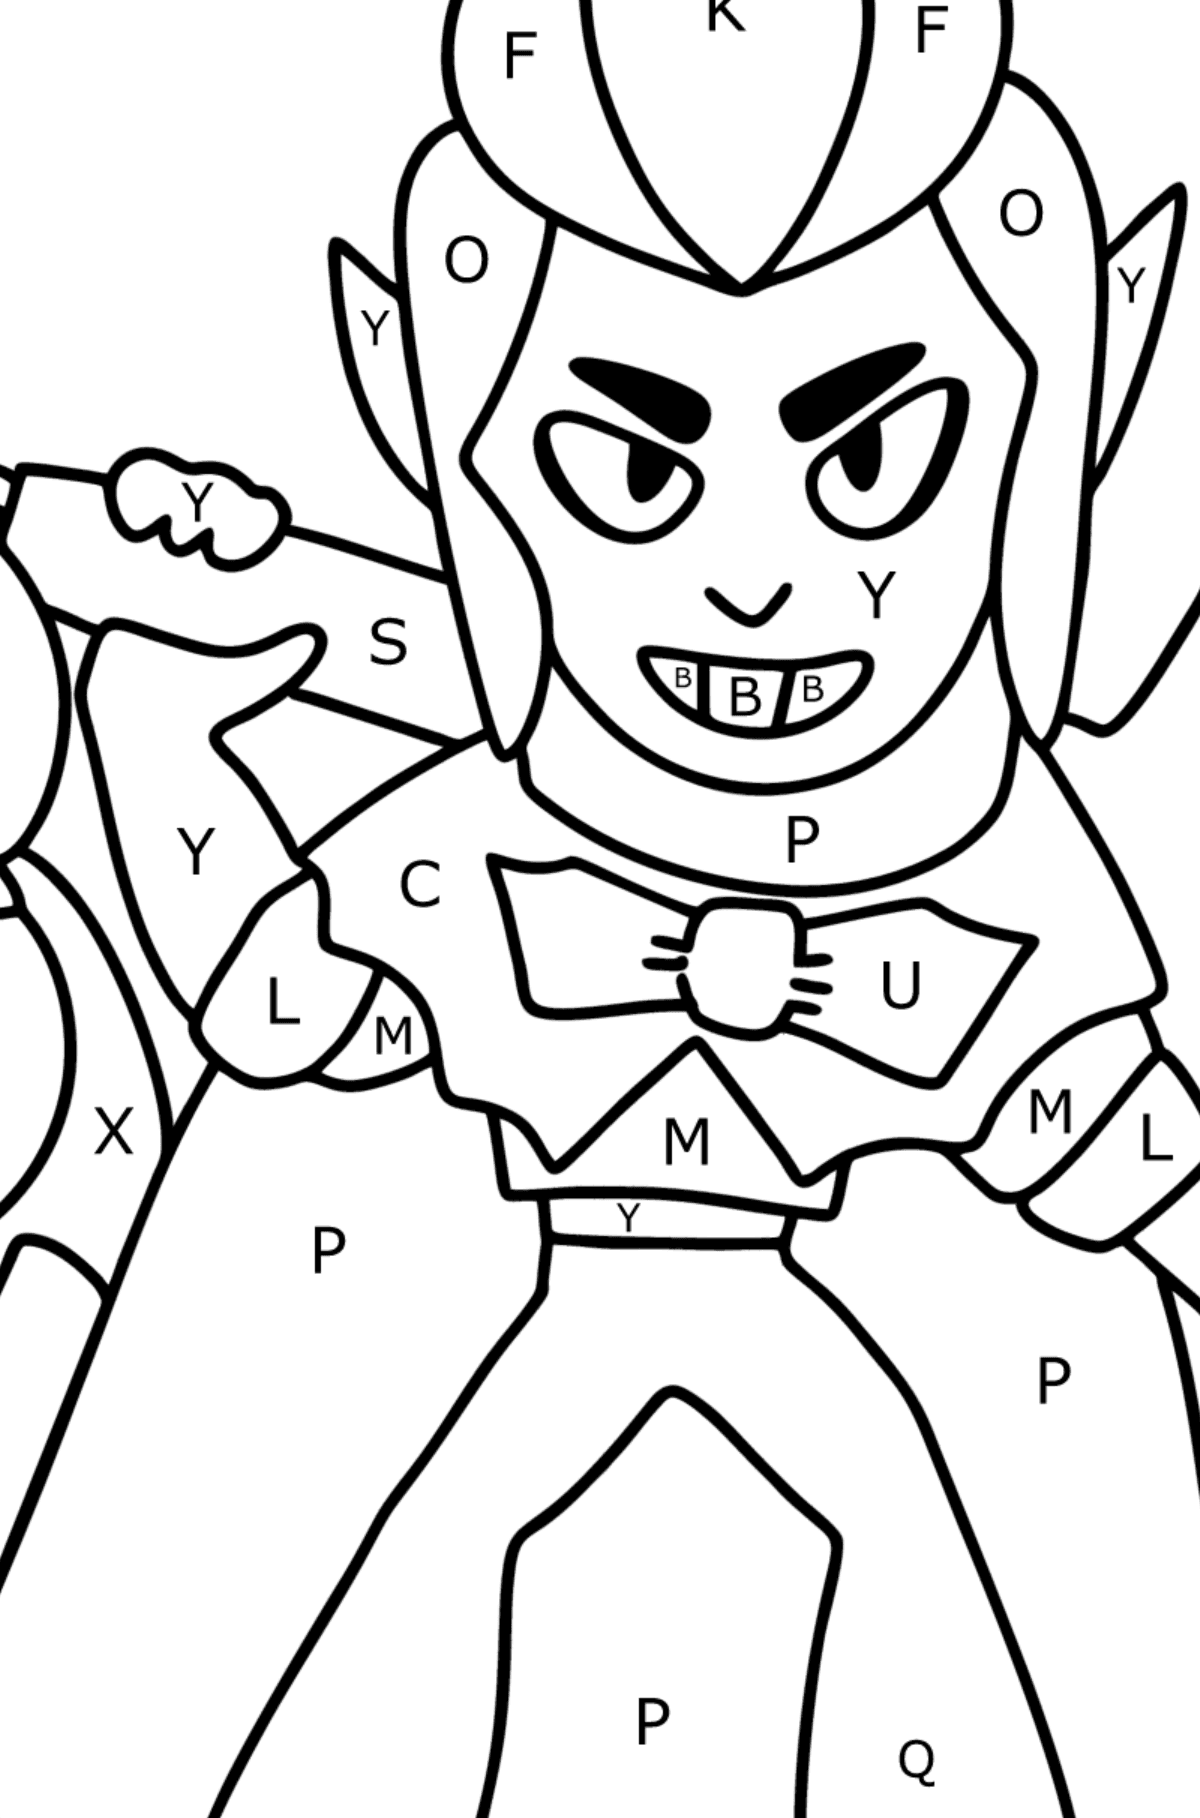 Brawl Stars Mortis coloring page - Coloring by Letters for Kids